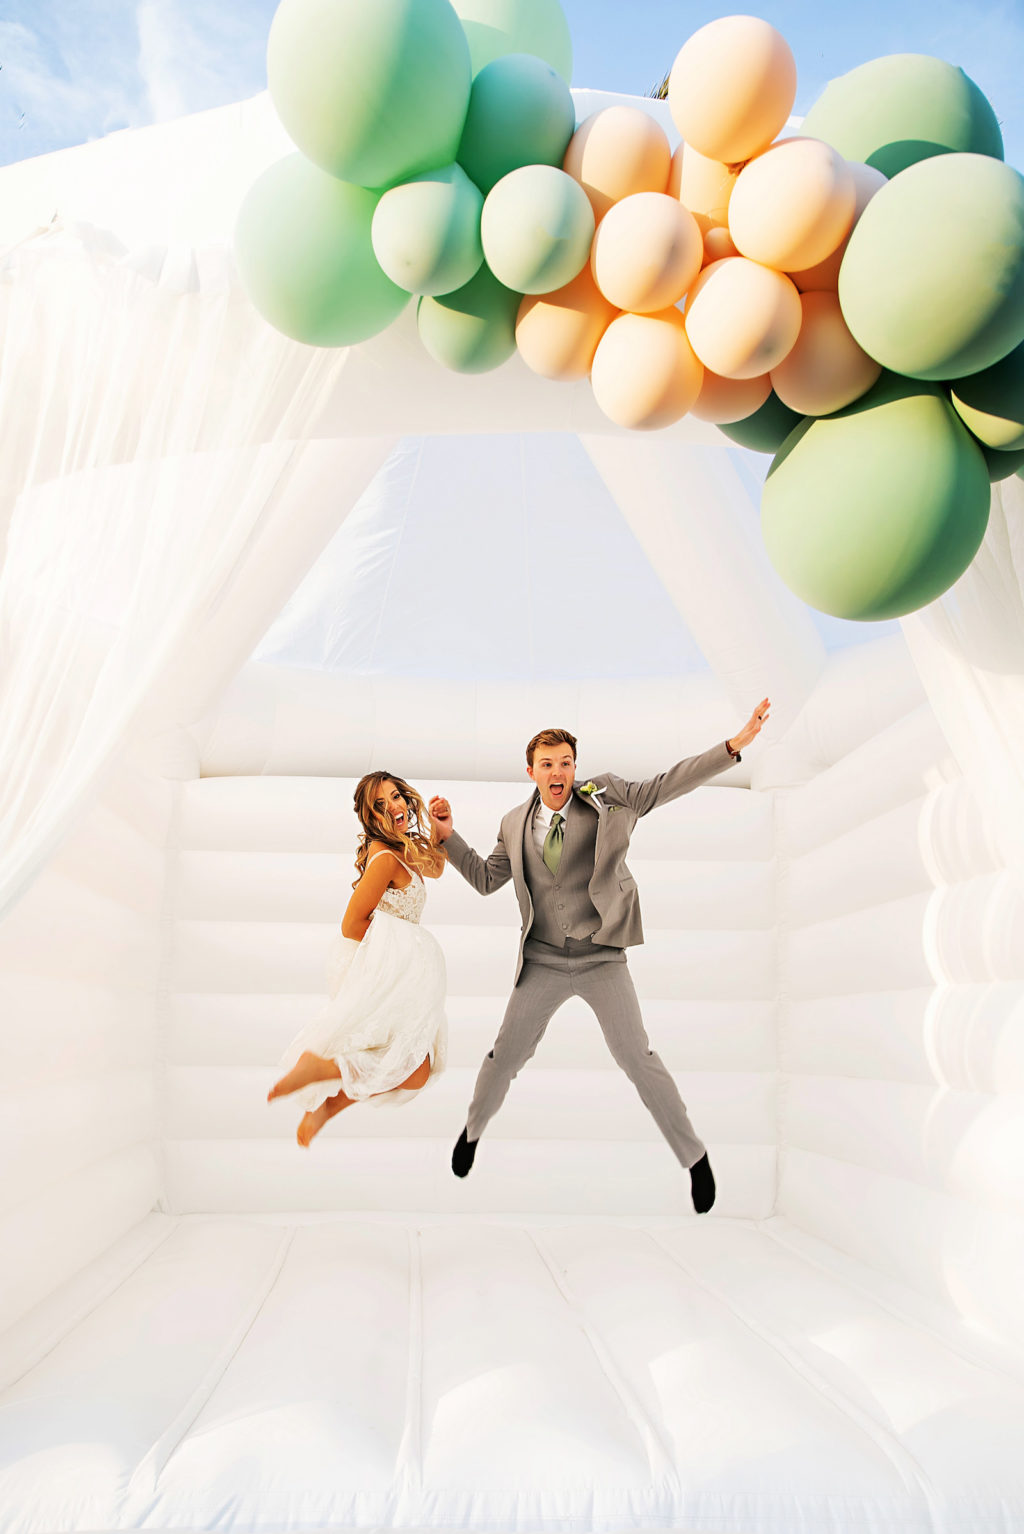 Bride and Groom Jumping on Fun, Unique White Adult Bounce House, Sage Green and Peach Balloons | Tampa Bay Wedding Photographer Limelight Photography | Wedding Planner MDP Events | Wedding Venue Esplanade Country Club | Wedding Dress Truly Forever Bridal Sarasota | Wedding Hair and Makeup Adore Bridal | Styled Shoot